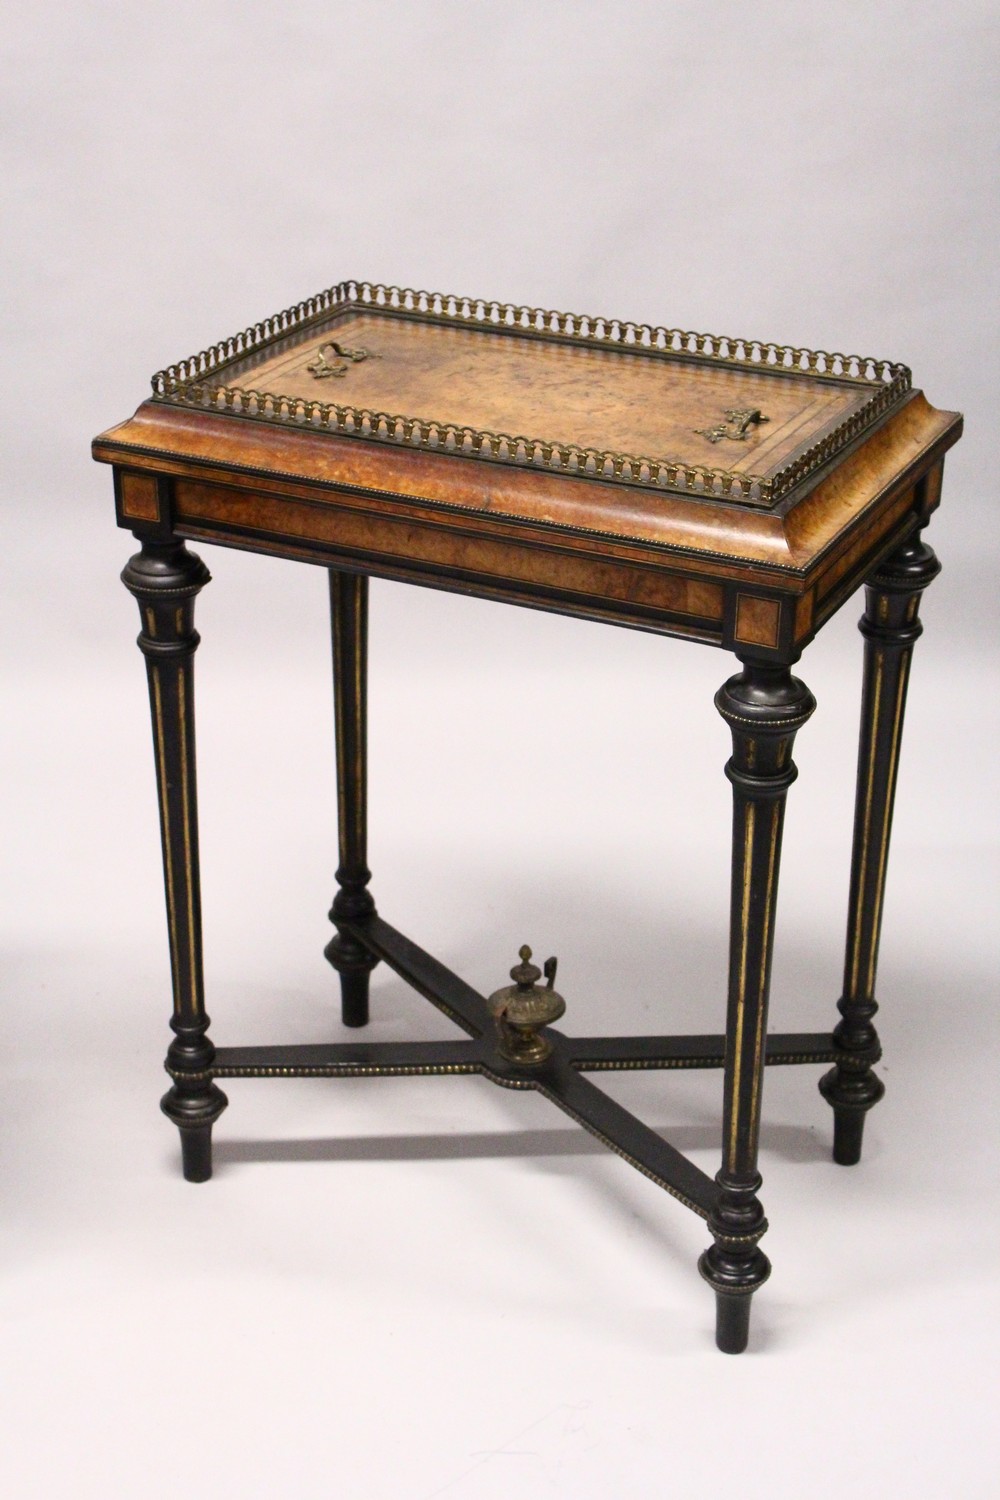 A PAIR OF 19TH CENTURY FRENCH WALNUT, EBONISED AND ORMOLU RECTANGULAR JARDINIERES, with removable - Image 3 of 9